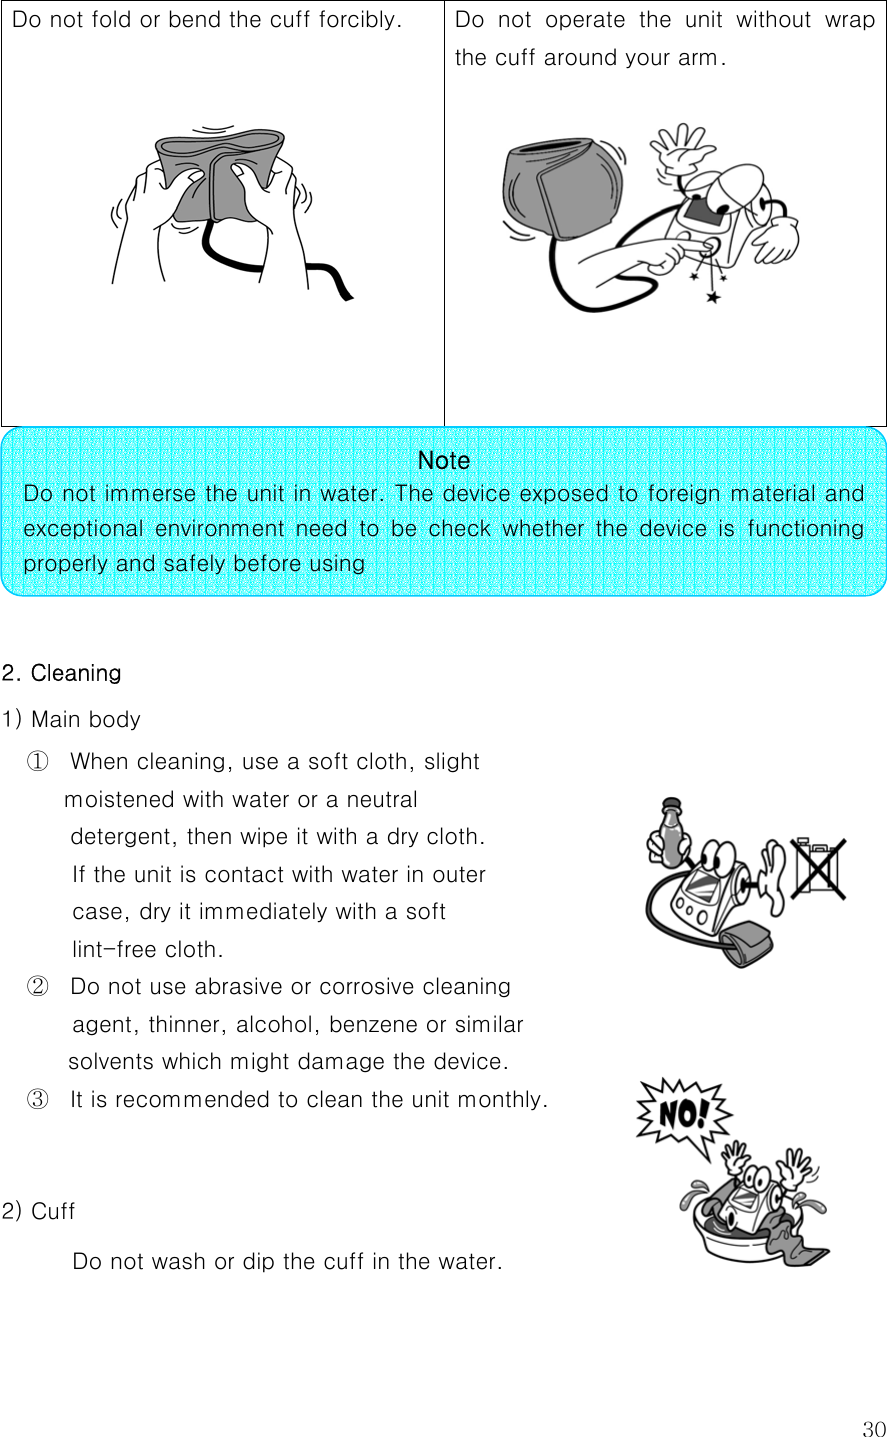  30Do not fold or bend the cuff forcibly.      Do not operate the unit without wrap the cuff around your arm.        2. Cleaning 1) Main body ①  When cleaning, use a soft cloth, slight   moistened with water or a neutral   detergent, then wipe it with a dry cloth. If the unit is contact with water in outer   case, dry it immediately with a soft   lint-free cloth. ②  Do not use abrasive or corrosive cleaning   agent, thinner, alcohol, benzene or similar solvents which might damage the device. ③  It is recommended to clean the unit monthly.  2) Cuff Do not wash or dip the cuff in the water.   Note Do not immerse the unit in water. The device exposed to foreign material and exceptional  environment  need  to  be  check  whether  the  device  is  functioning properly and safely before using 